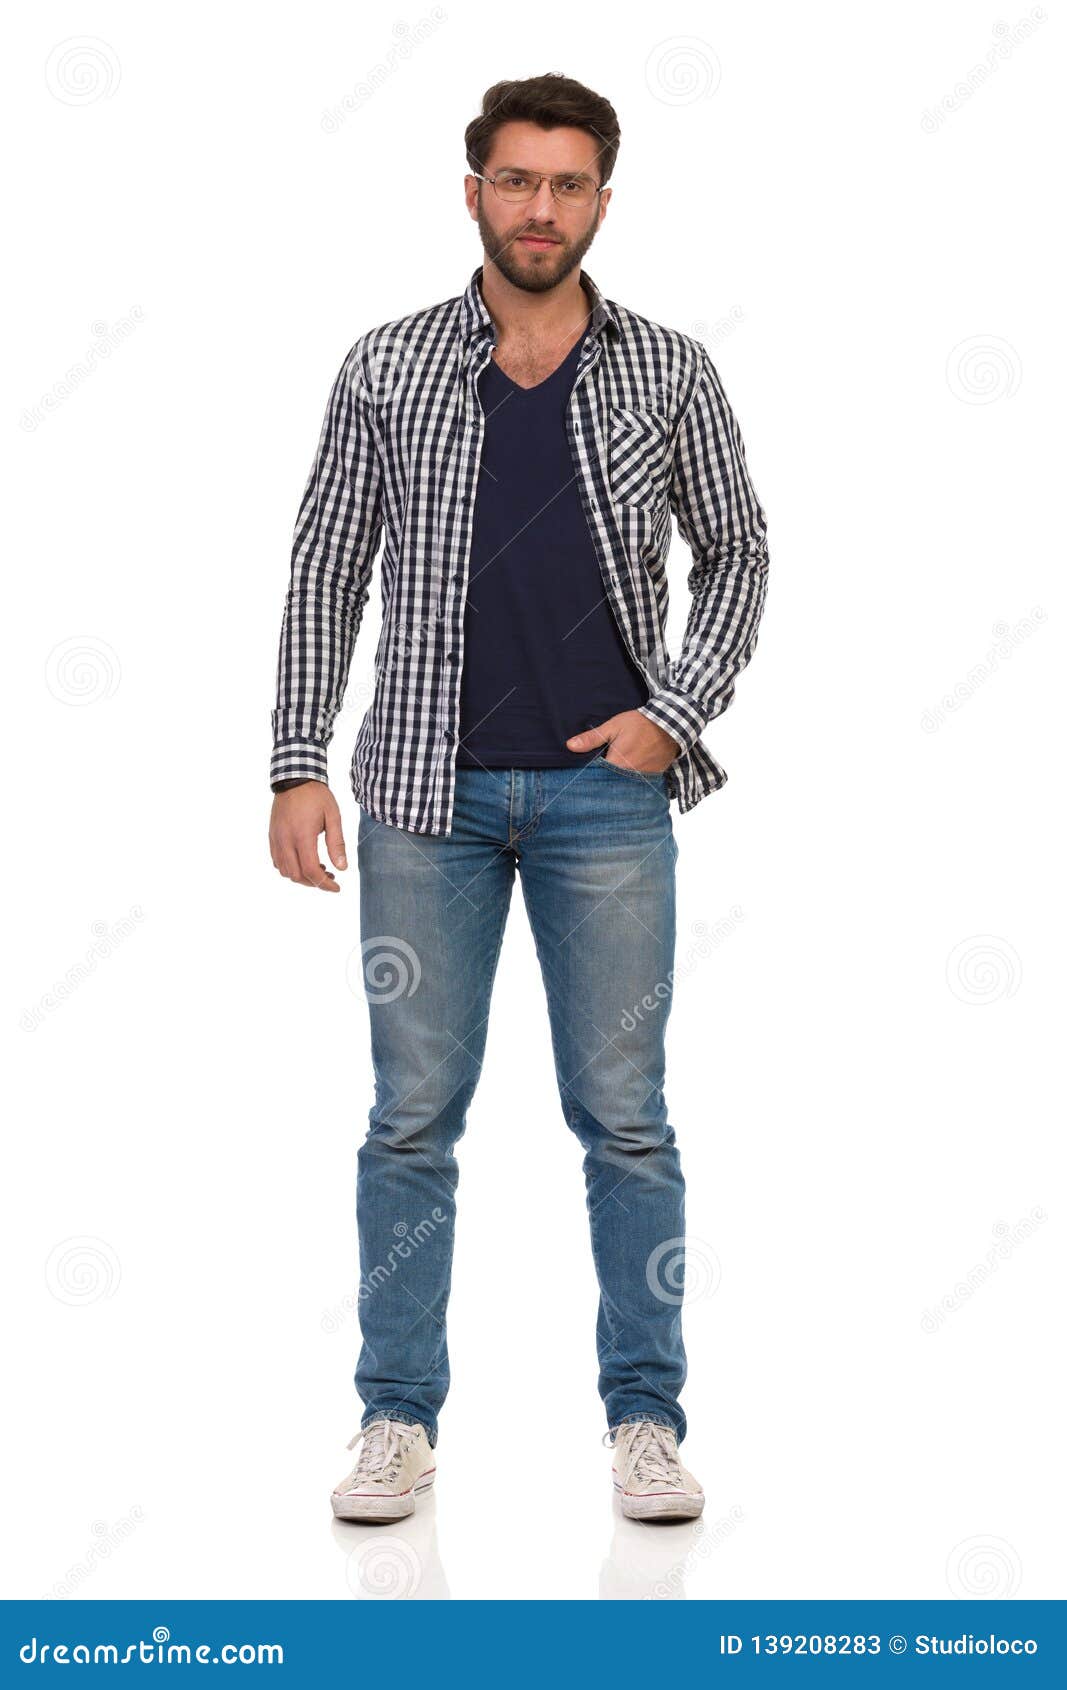 Young Man in Sneakers, Jeans, Lumberjack Shirt and Glasses is Standing with  Hand in Pocket Stock Image - Image of positivity, beard: 139208283